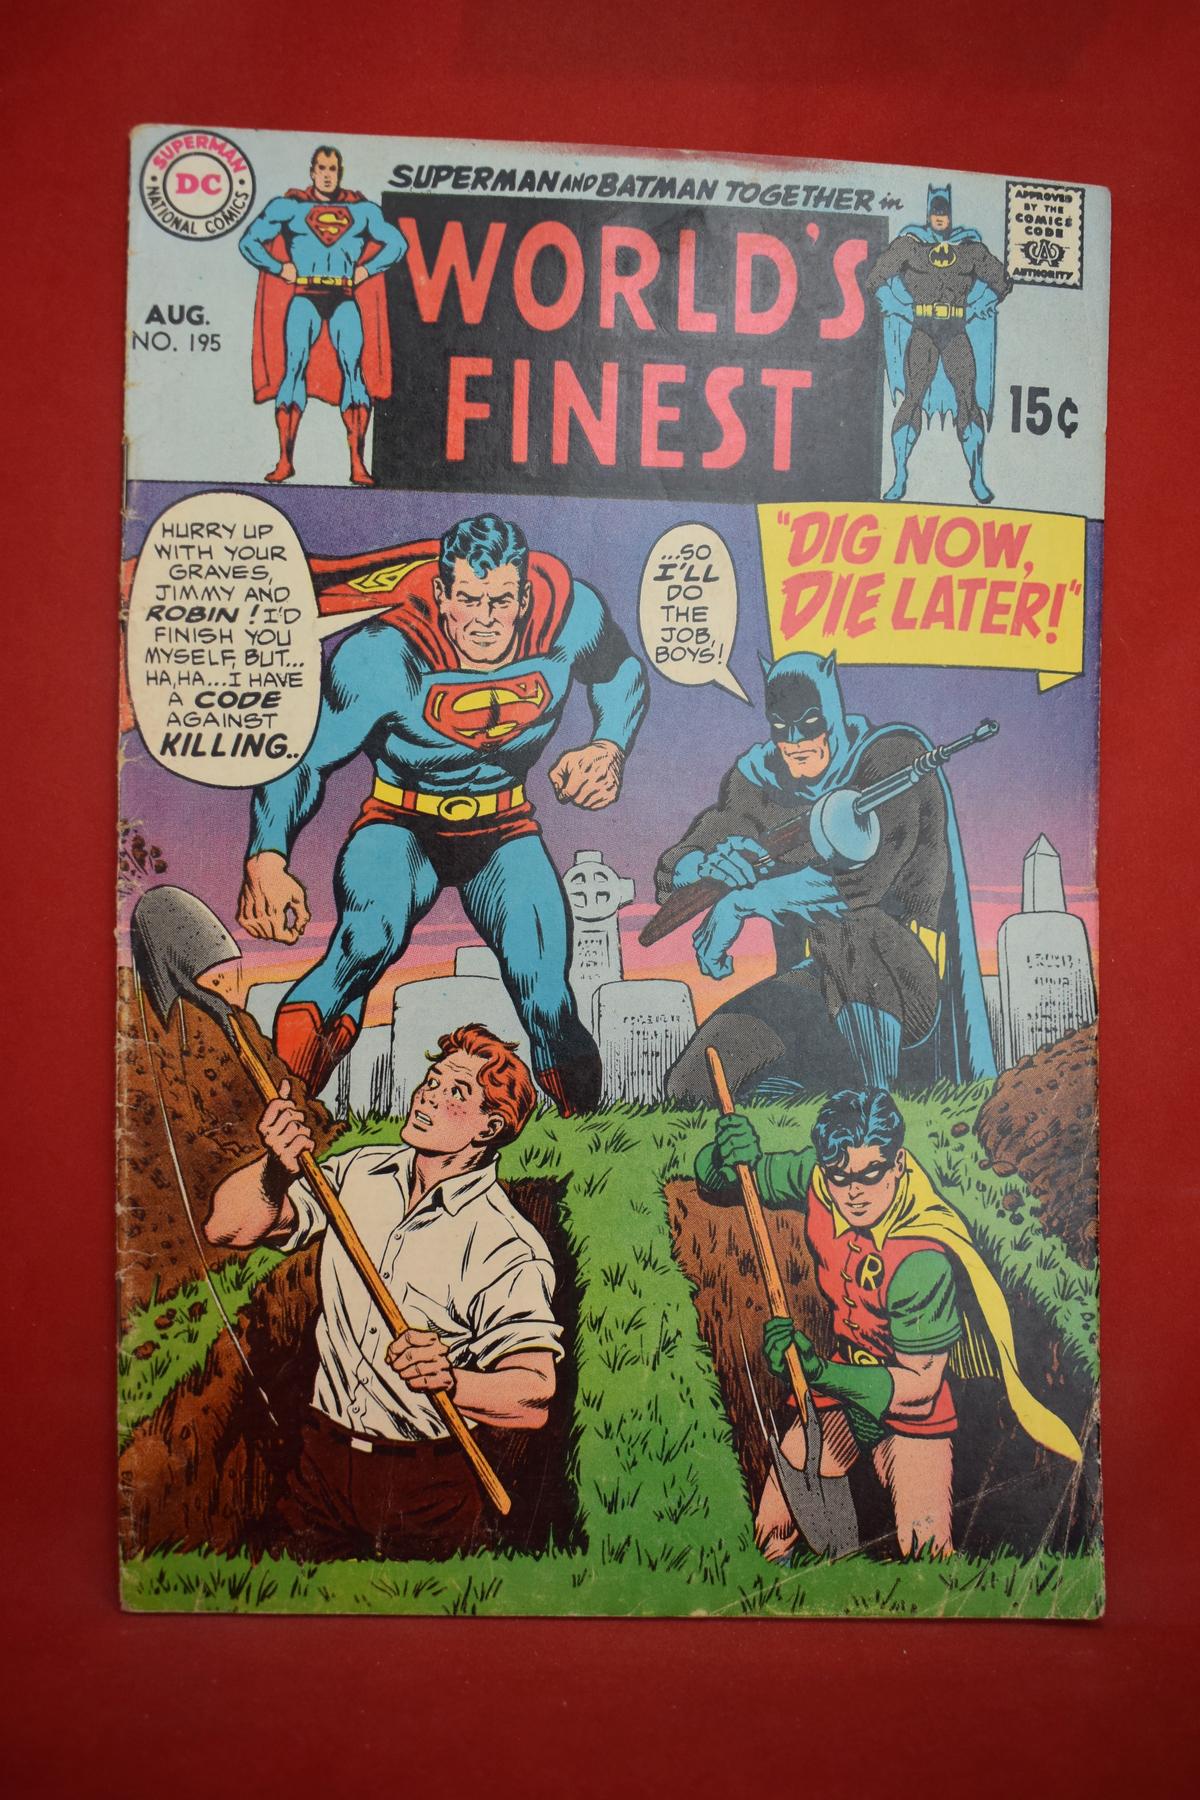 WORLDS FINEST #195 | DIG NOW, DIE LATER | CURT SWAN & MURPHY ANDERSON - 1970